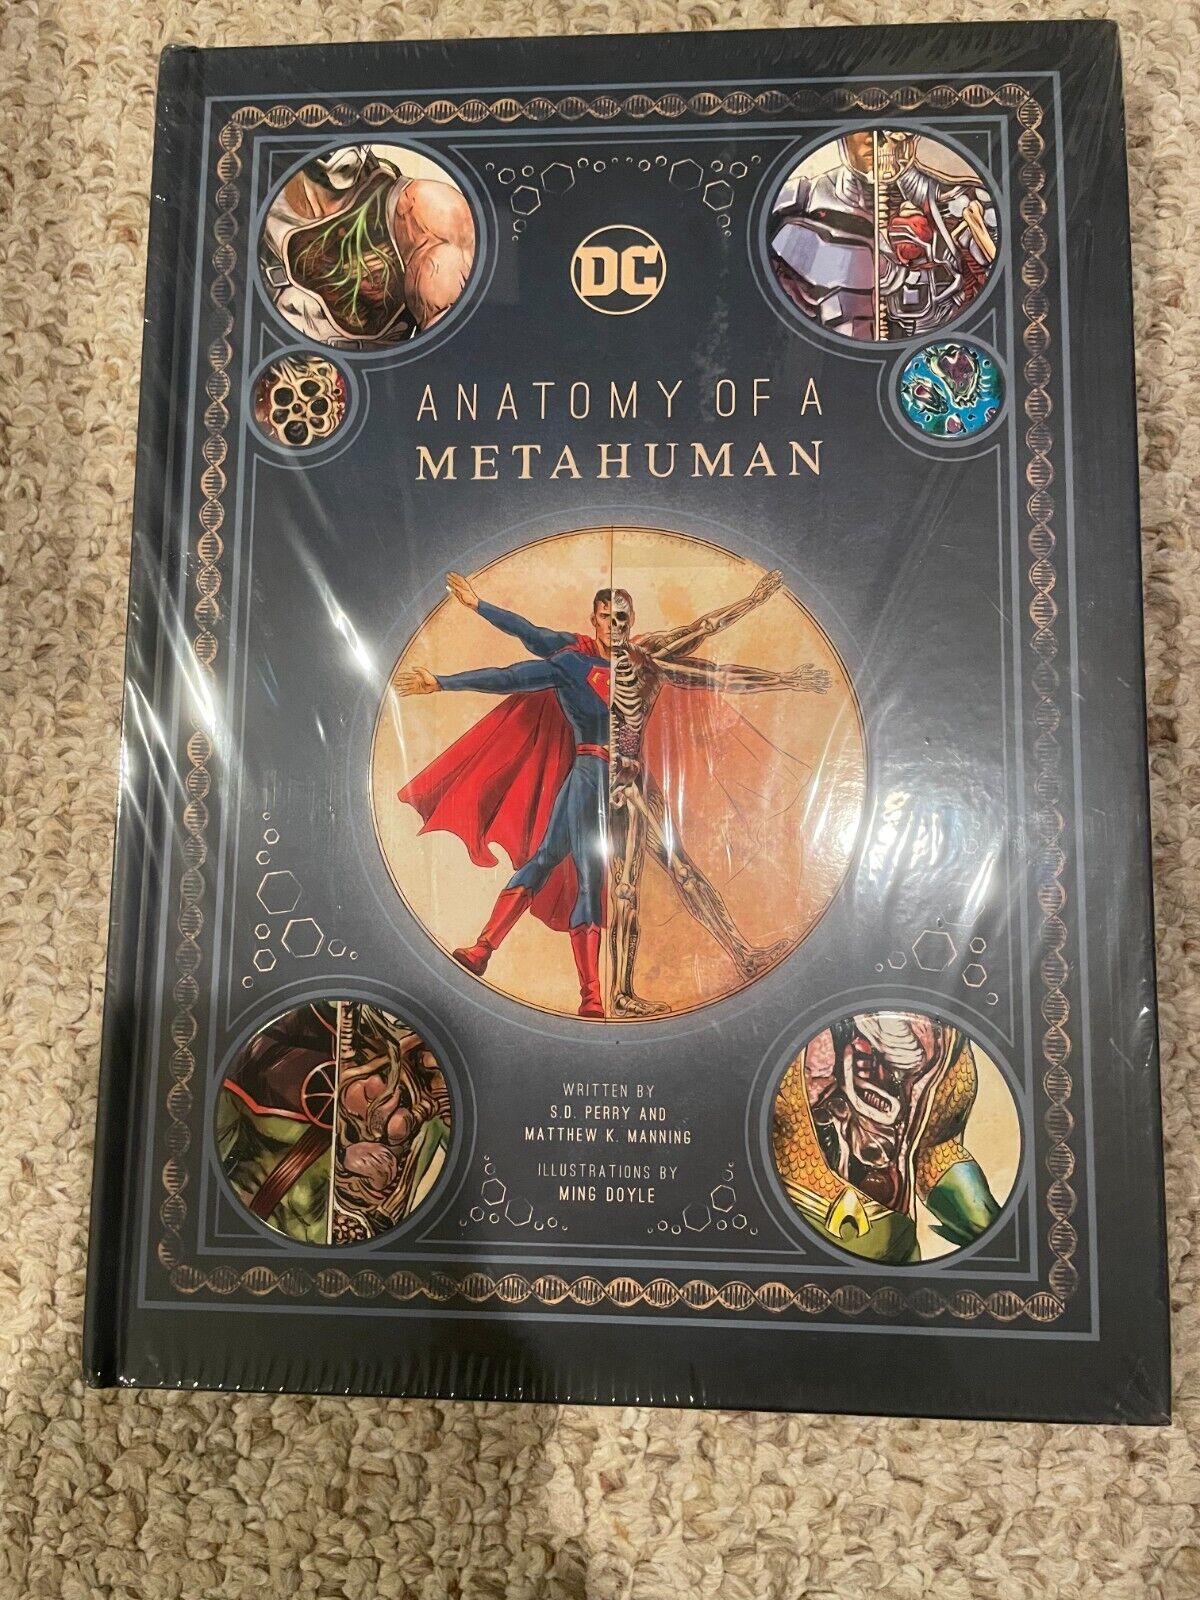 DC Comics: Anatomy of a Metahuman by S. D. Perry New Never Read